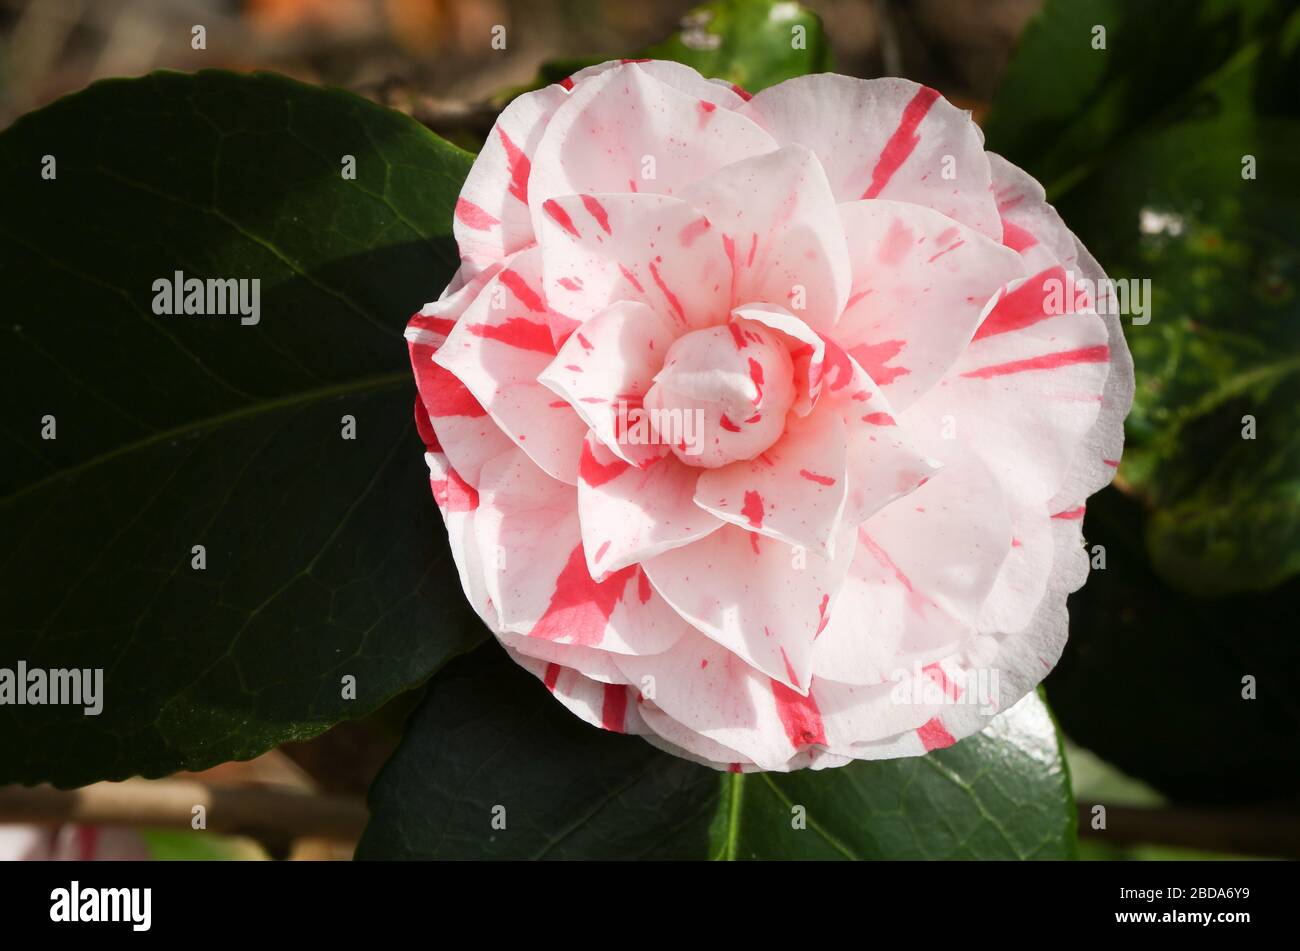 A beautiful flowering Camellia plant growing in a garden in spring. Stock Photo